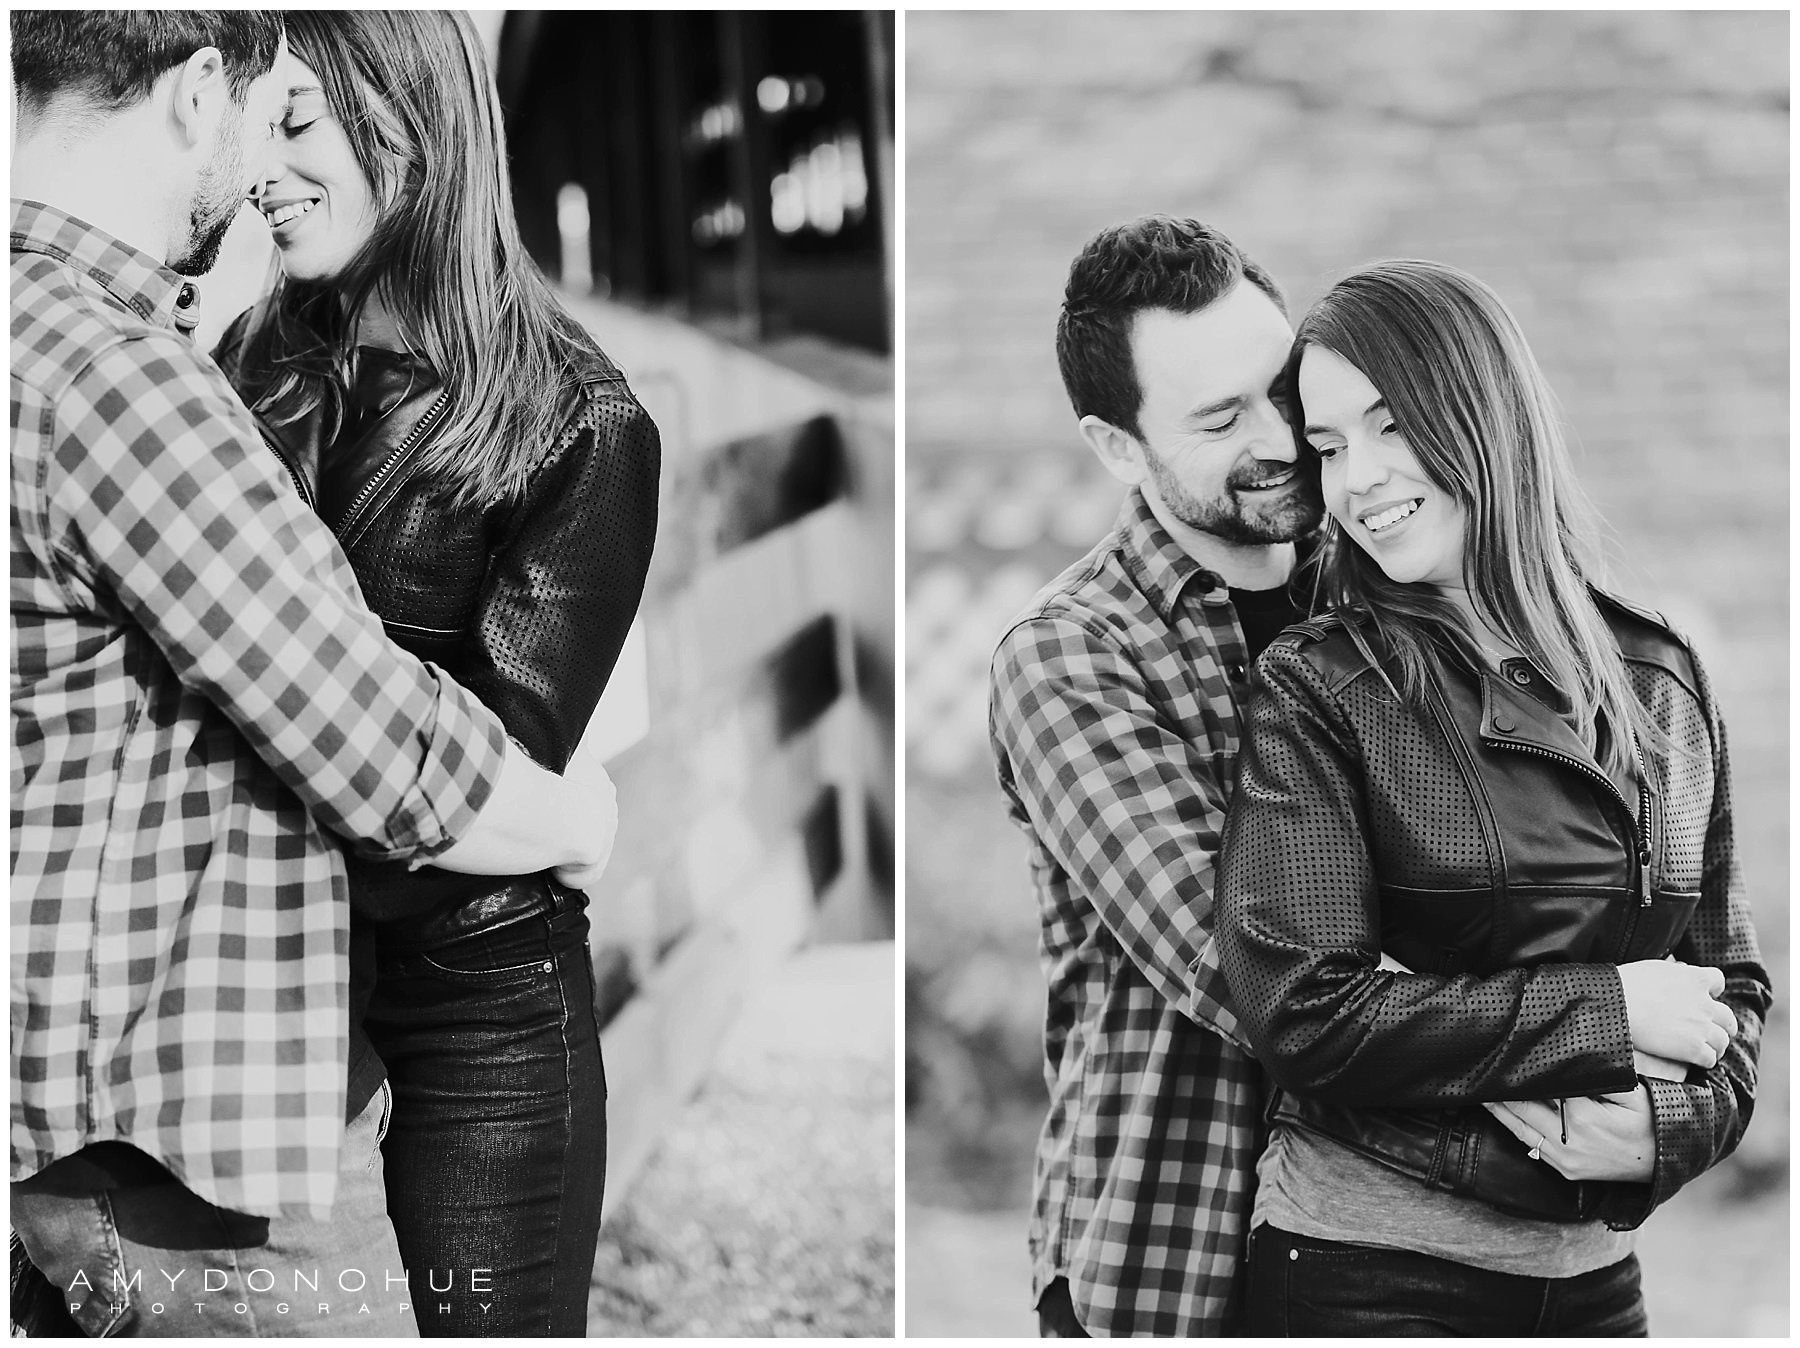 Intimate Engagement Photos Black and White Woodstock, Vermont | © Amy Donohue Photography